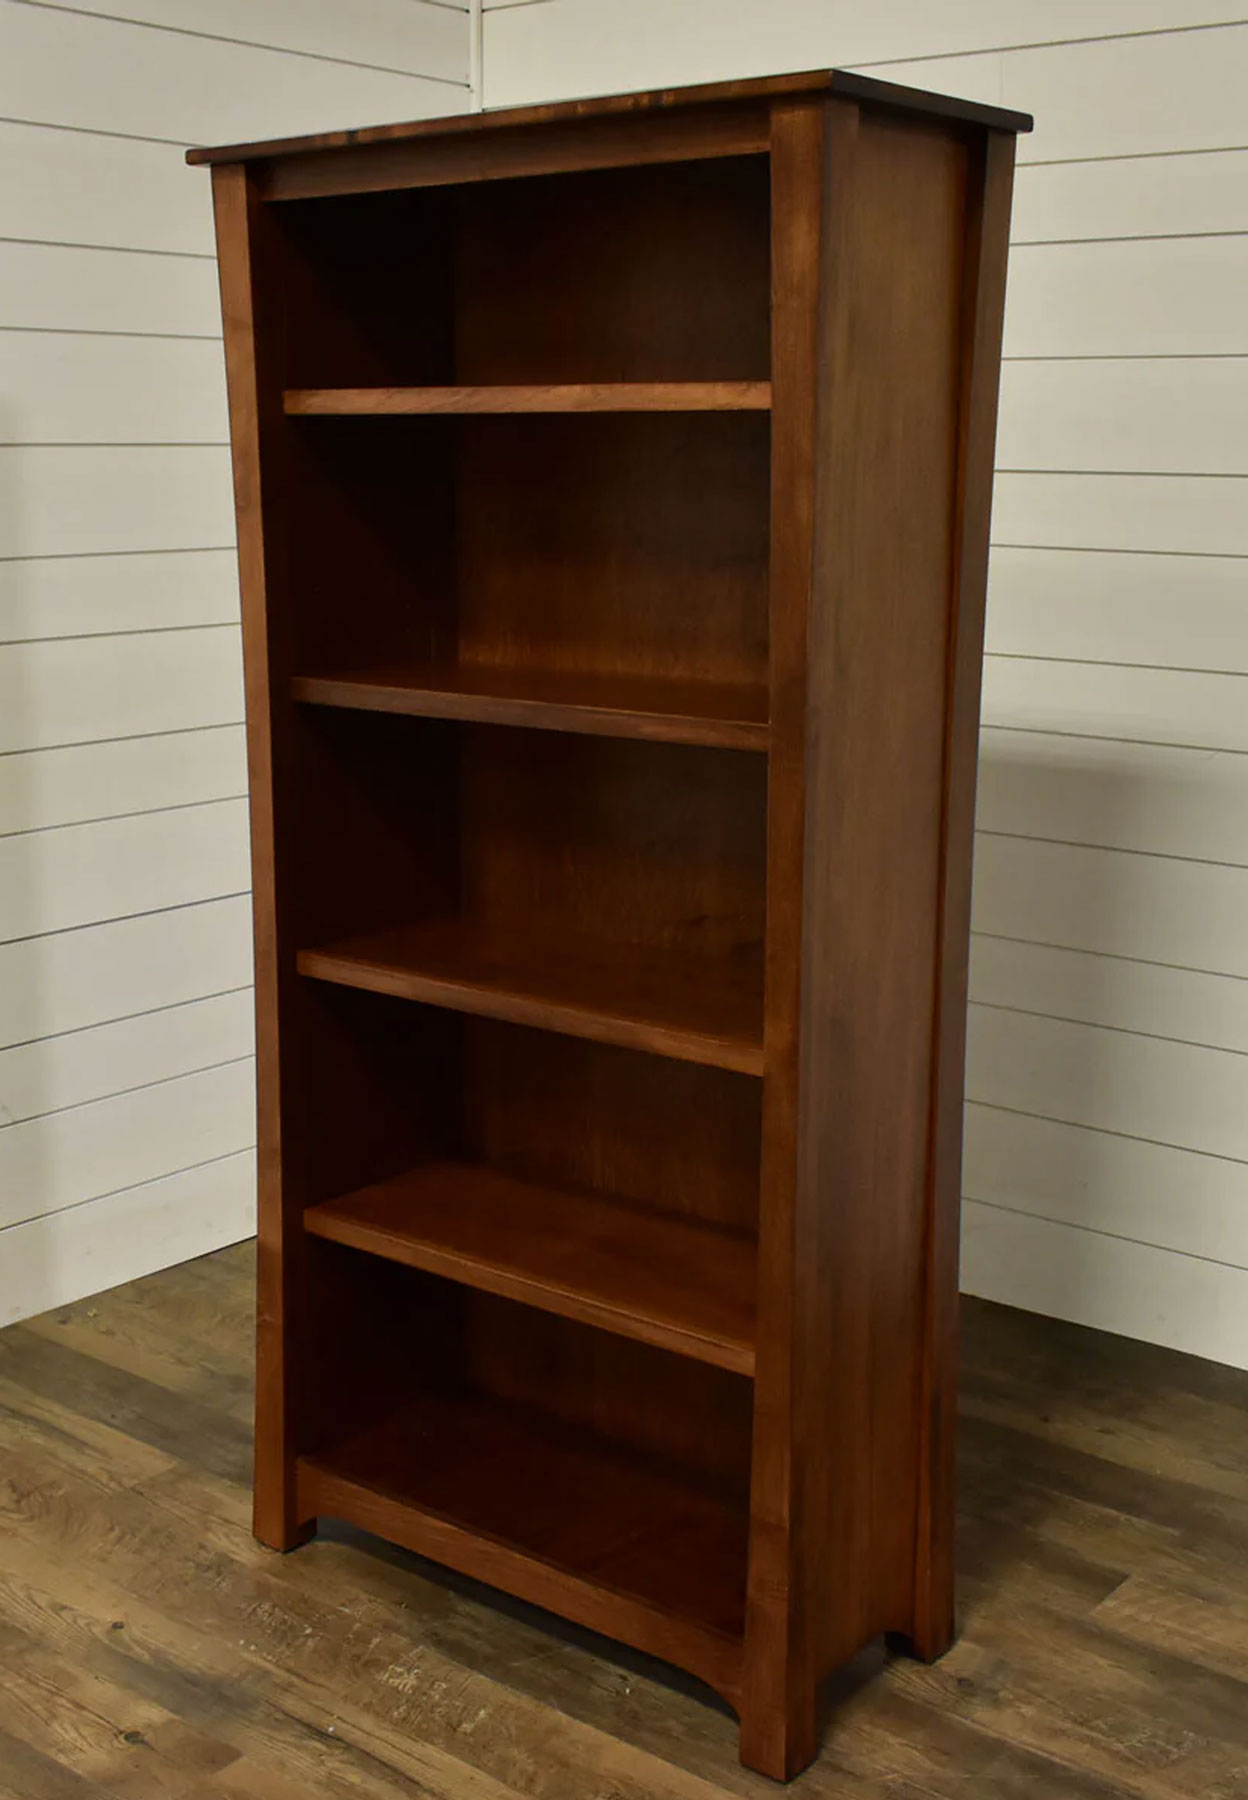 Woodbury 36 x 72 Bookcase in Brown Maple